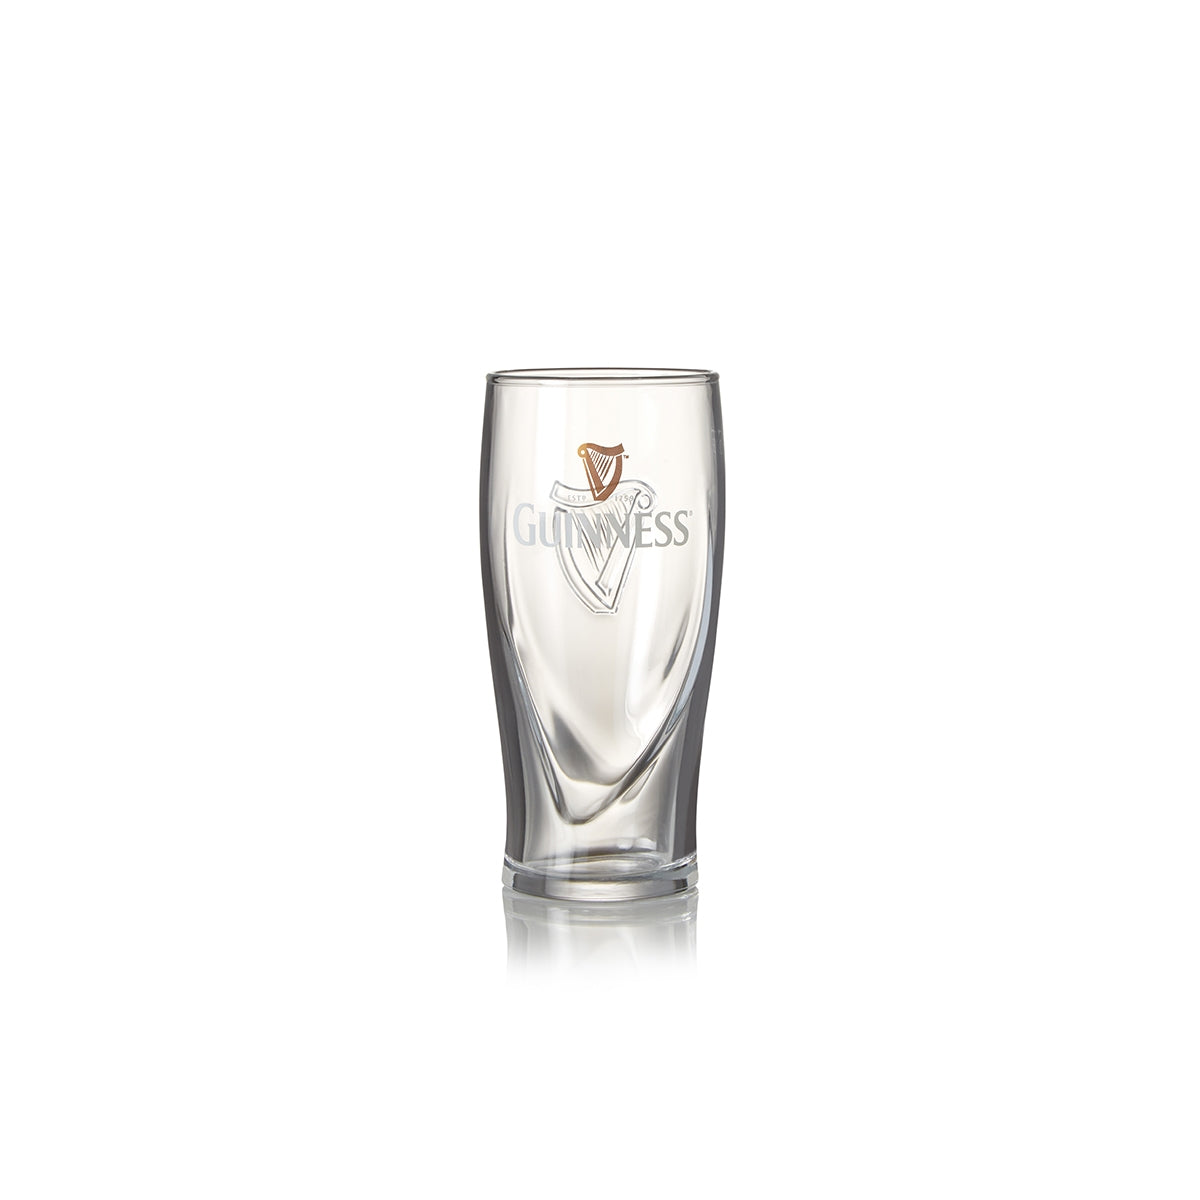 A Guinness Half Pint Glass 24 Pack on a white background.